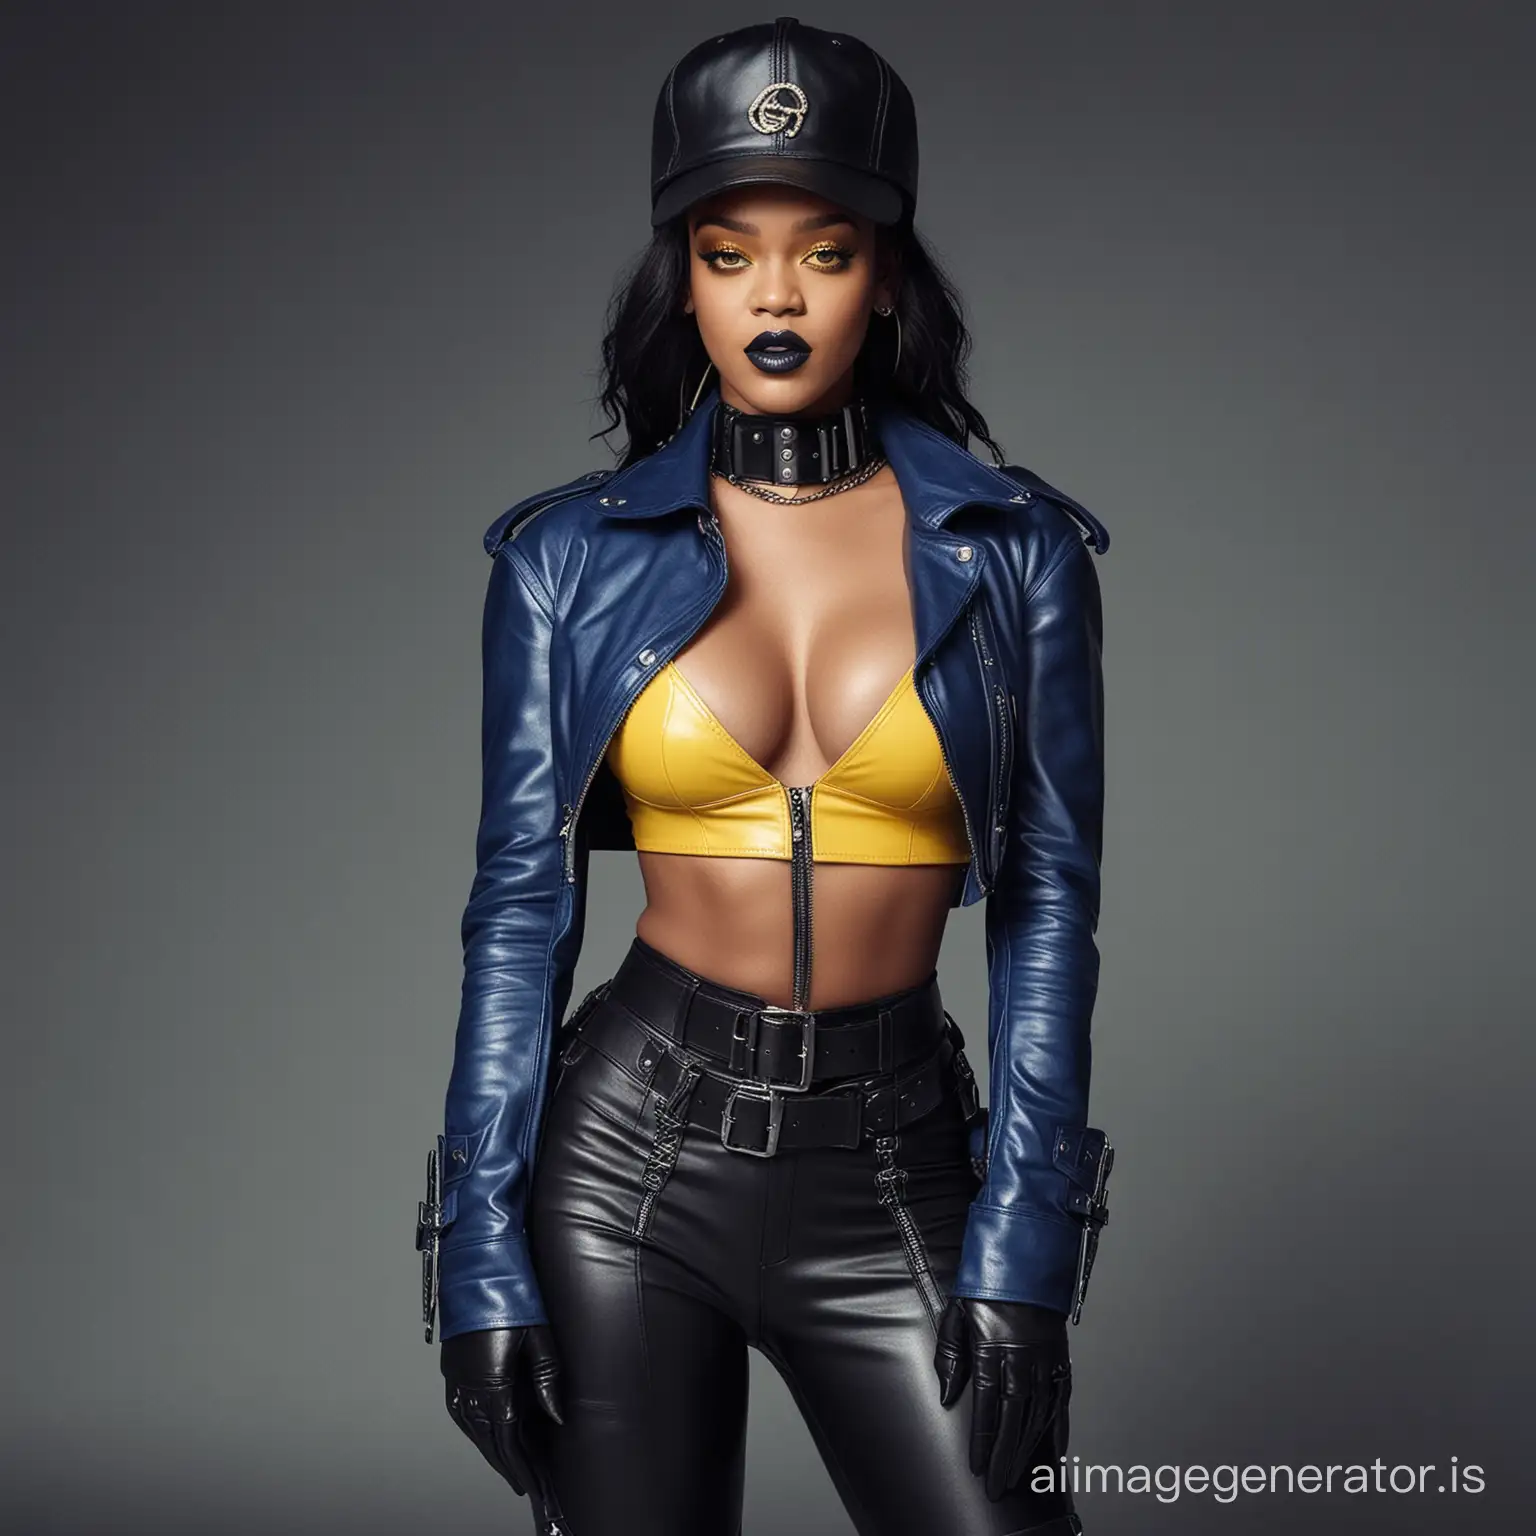 rihanna, big breasts, muscular black woman in buckled blue leather straightjacket, black leather gloves, leather masters cap, leather boots, black lipstick, yellow eye shadow,